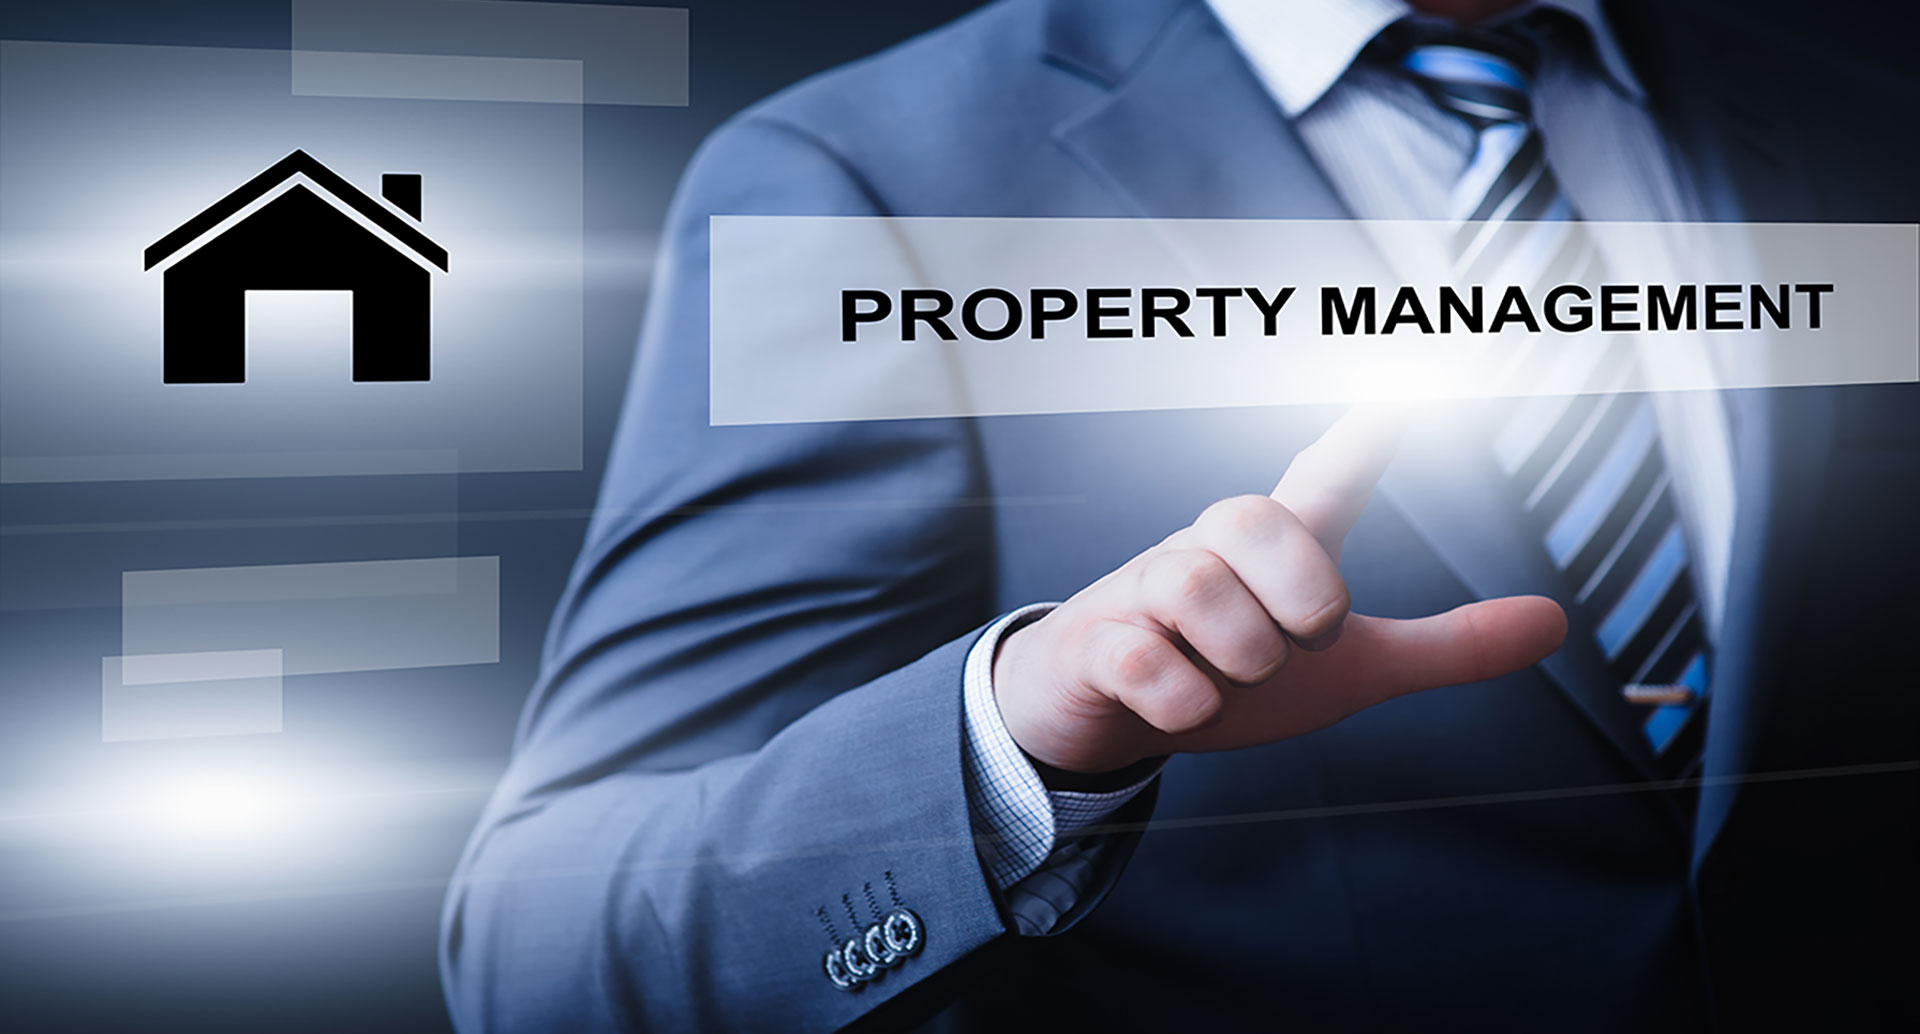 PM365 For Property Management